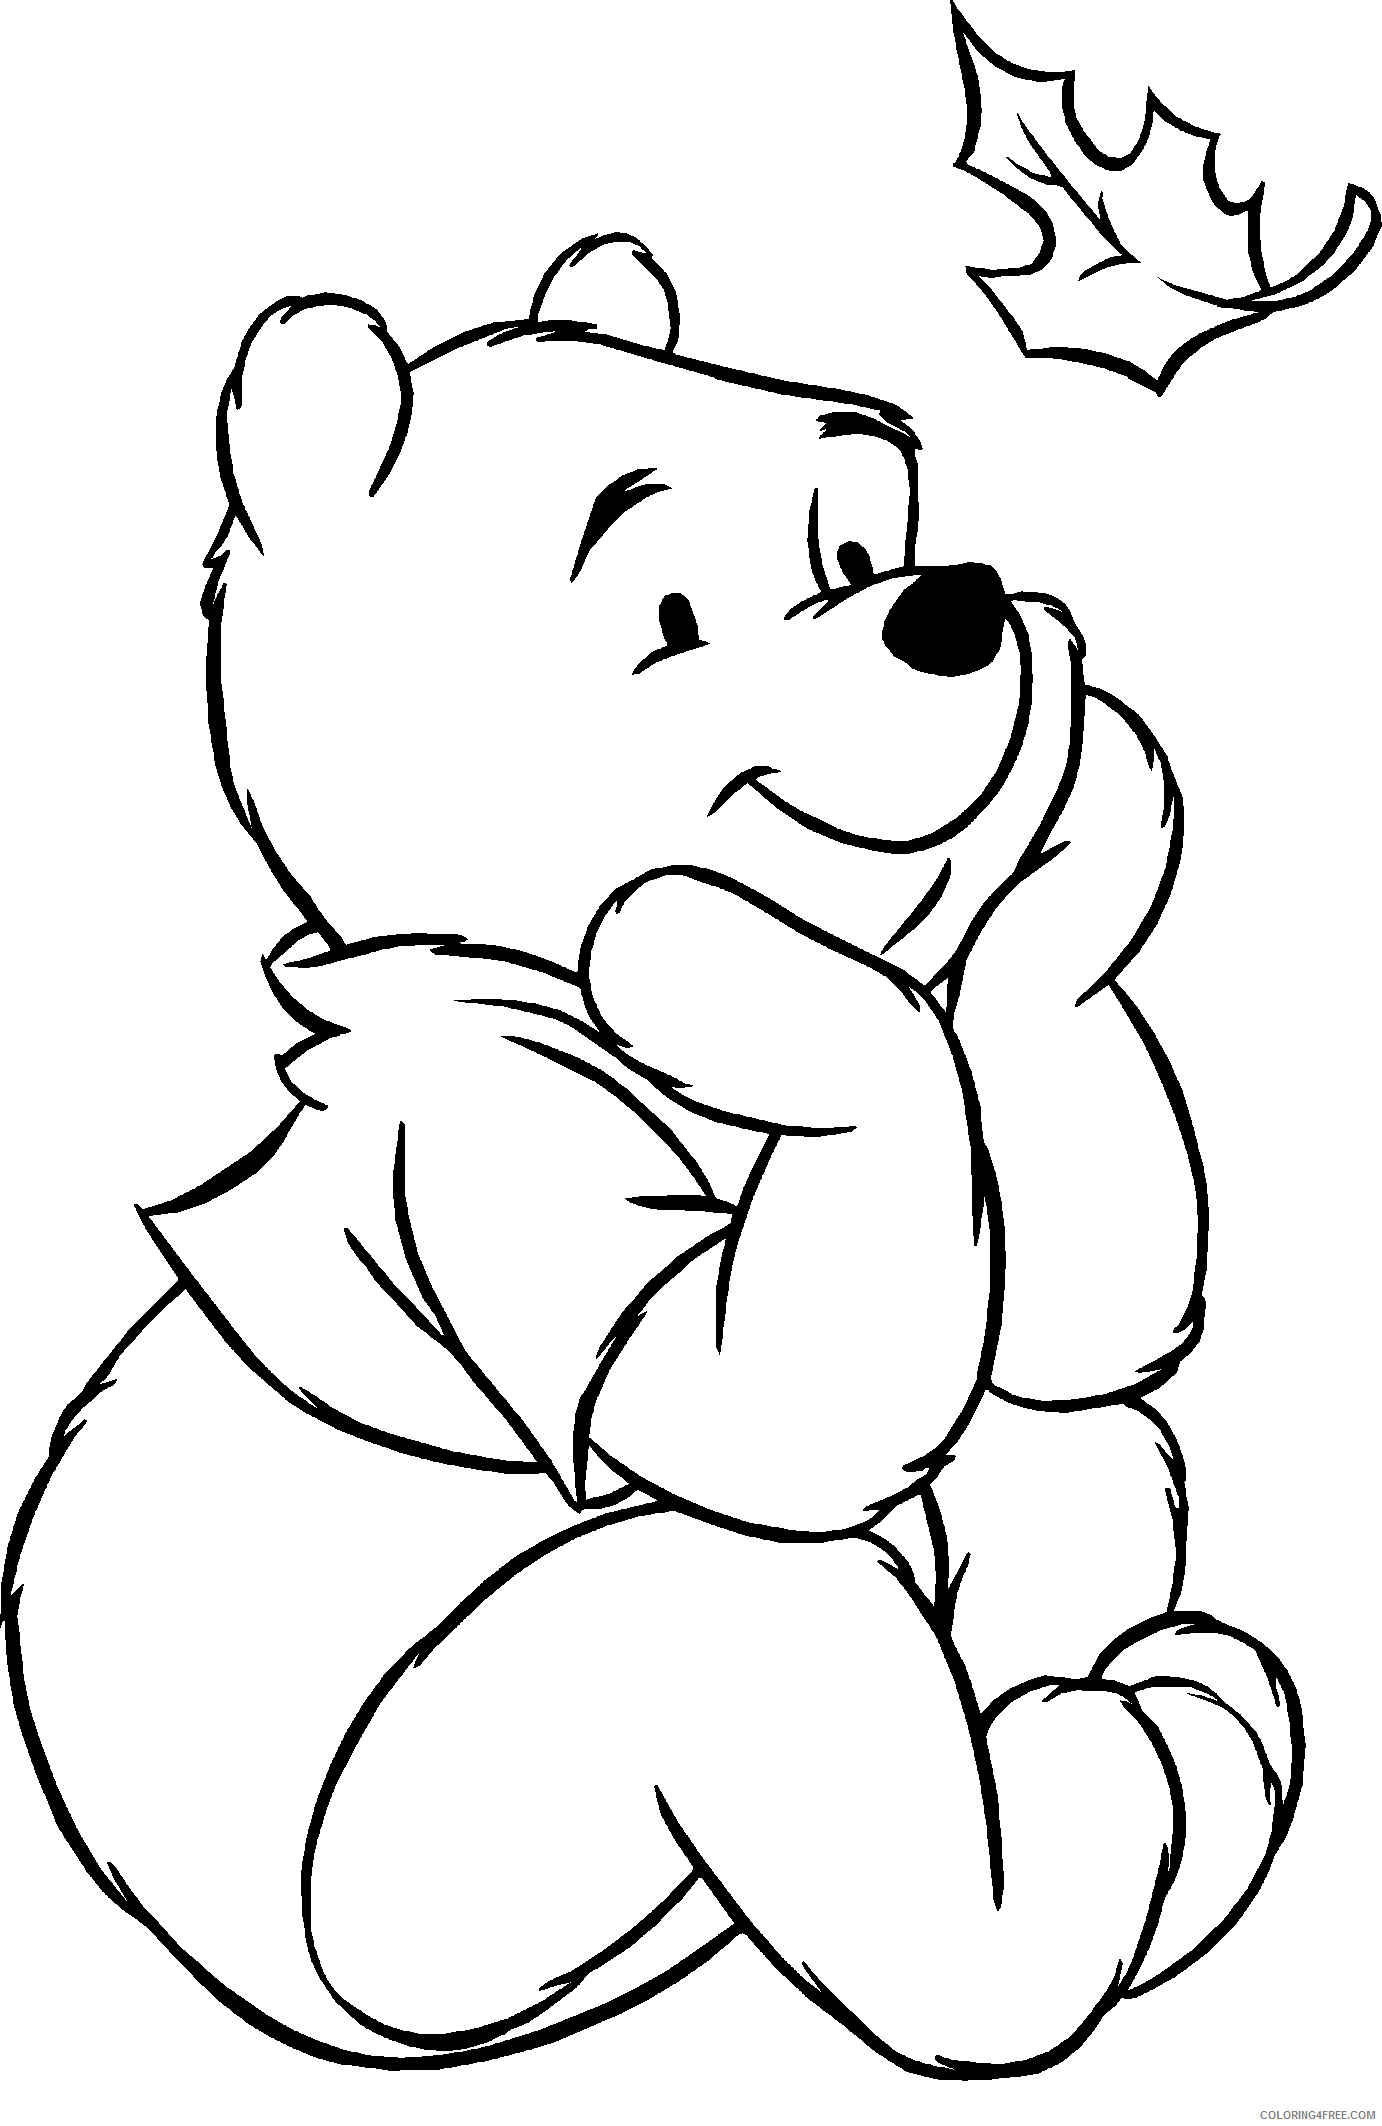 Winnie the Pooh Coloring Pages Cartoons Winnie The Pooh Printable 2020 7074 Coloring4free